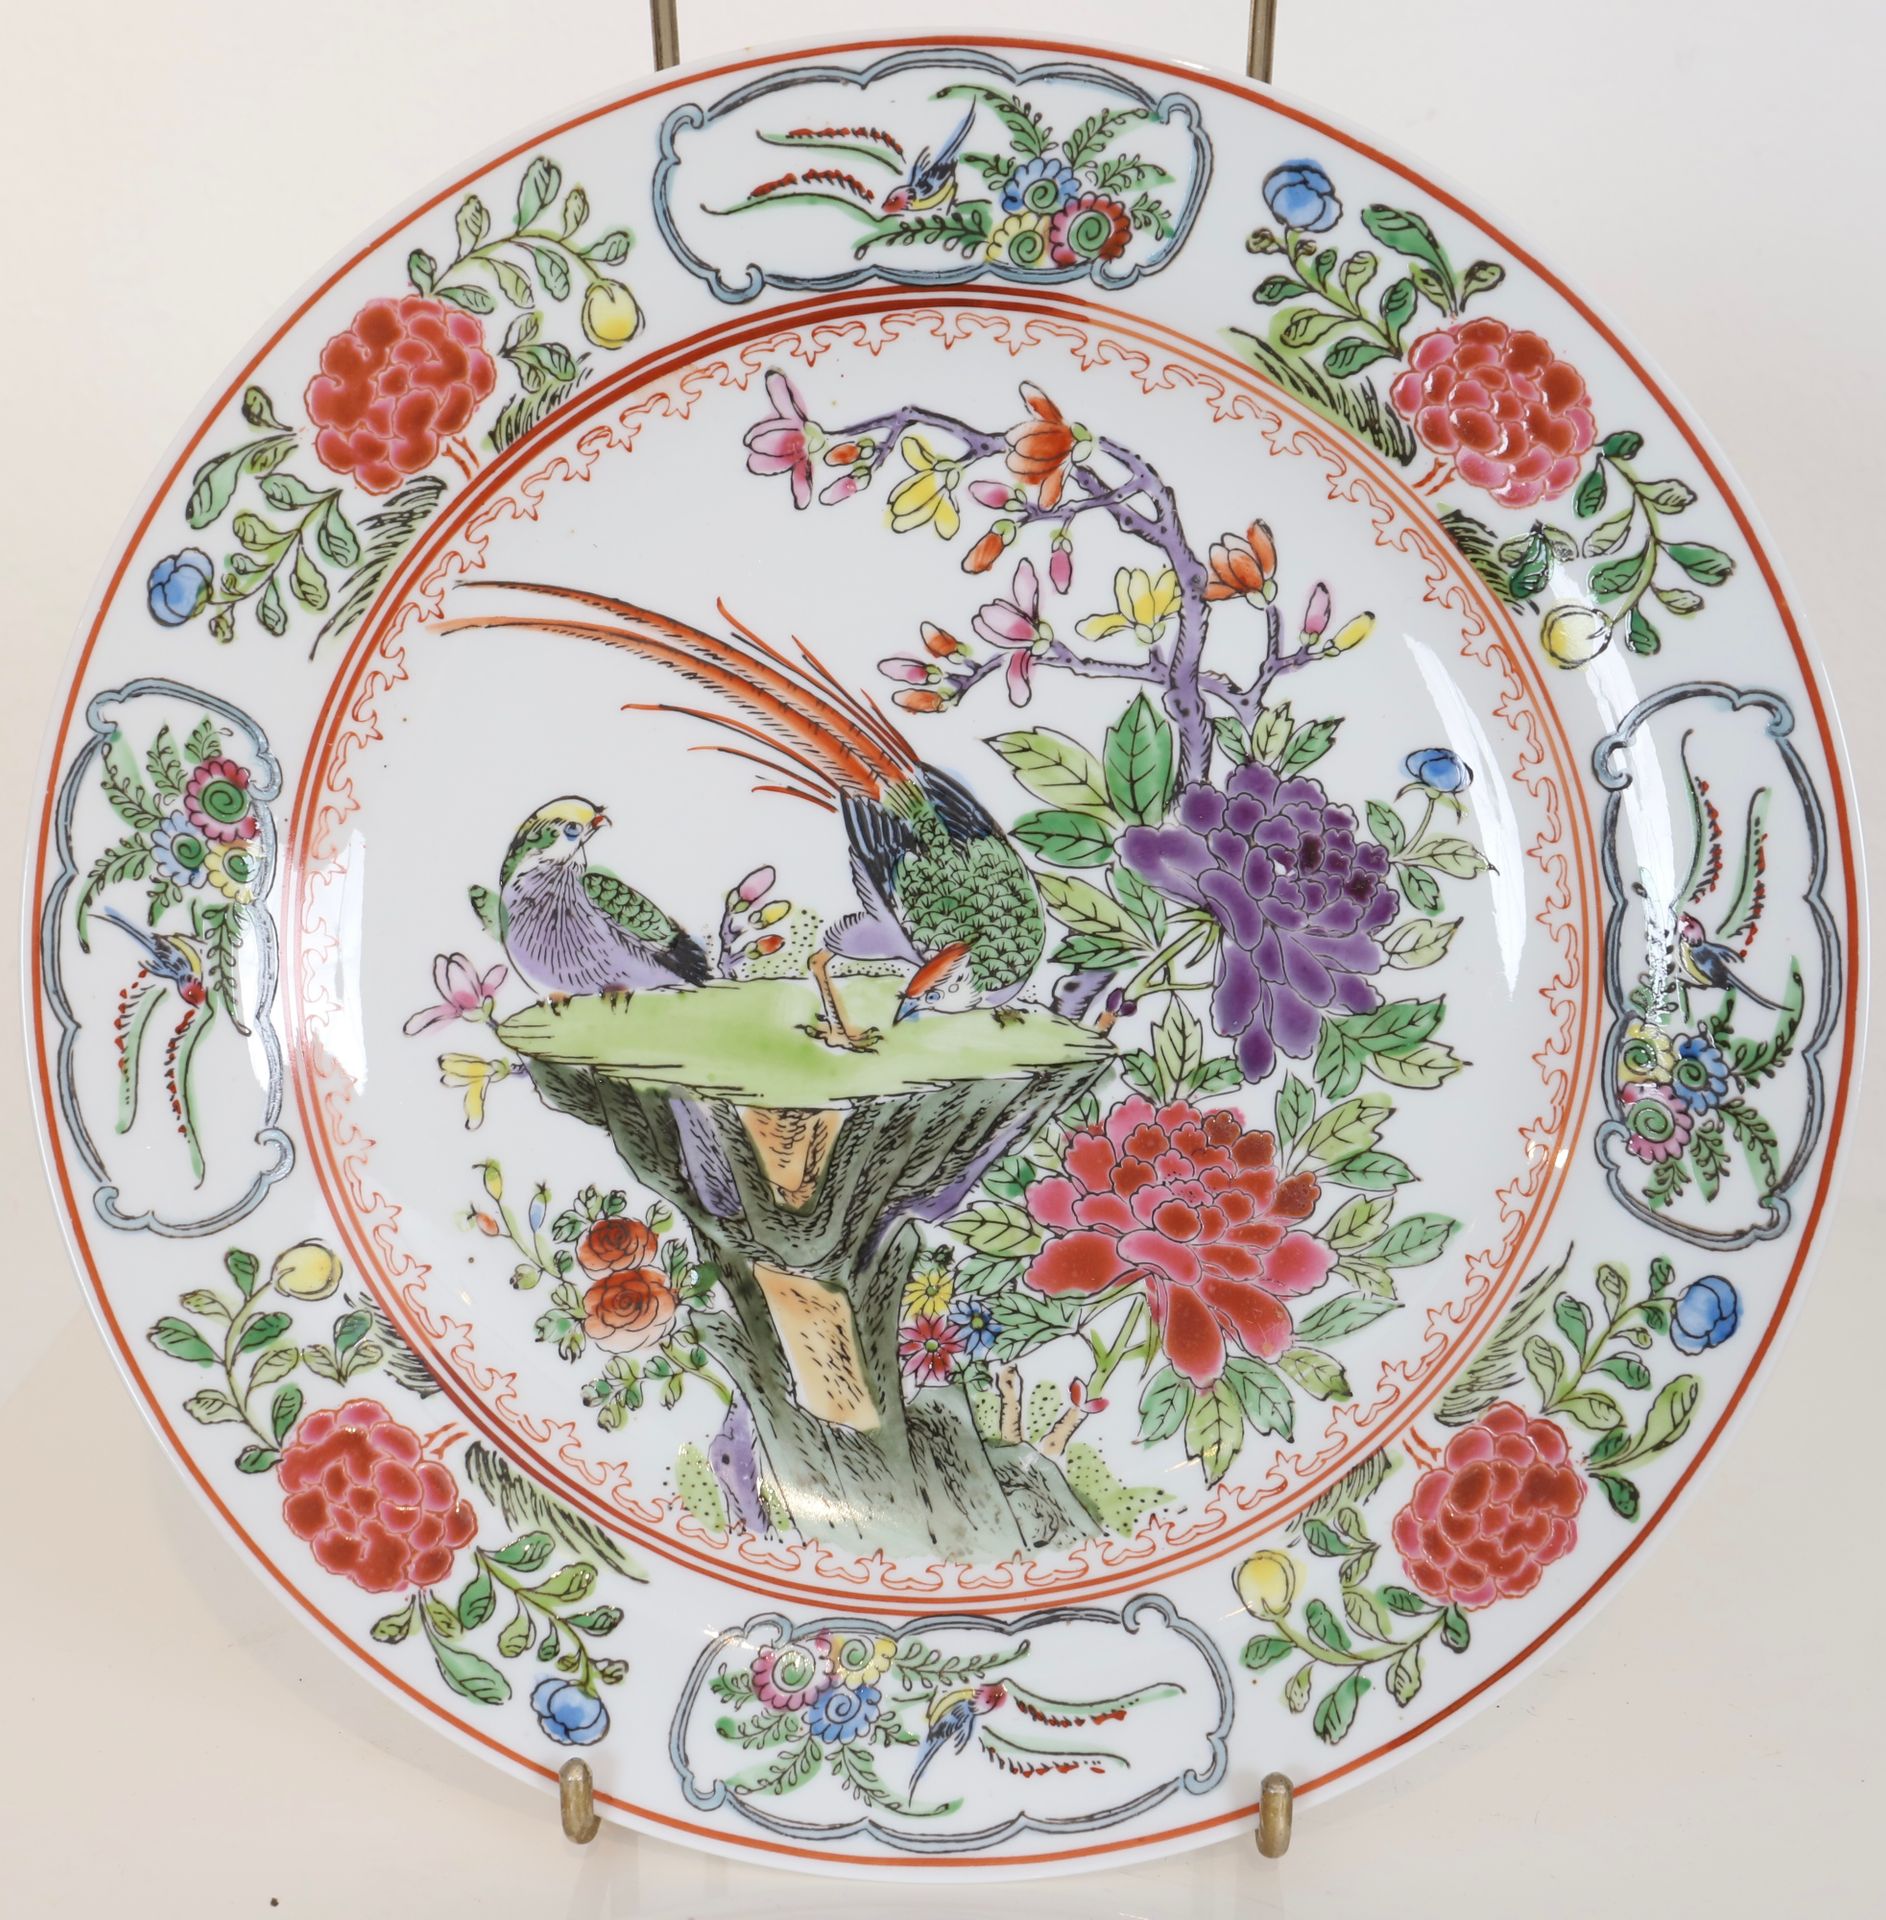 Null Plate - China
In polychrome porcelain decorated with panels and flowers.
St&hellip;